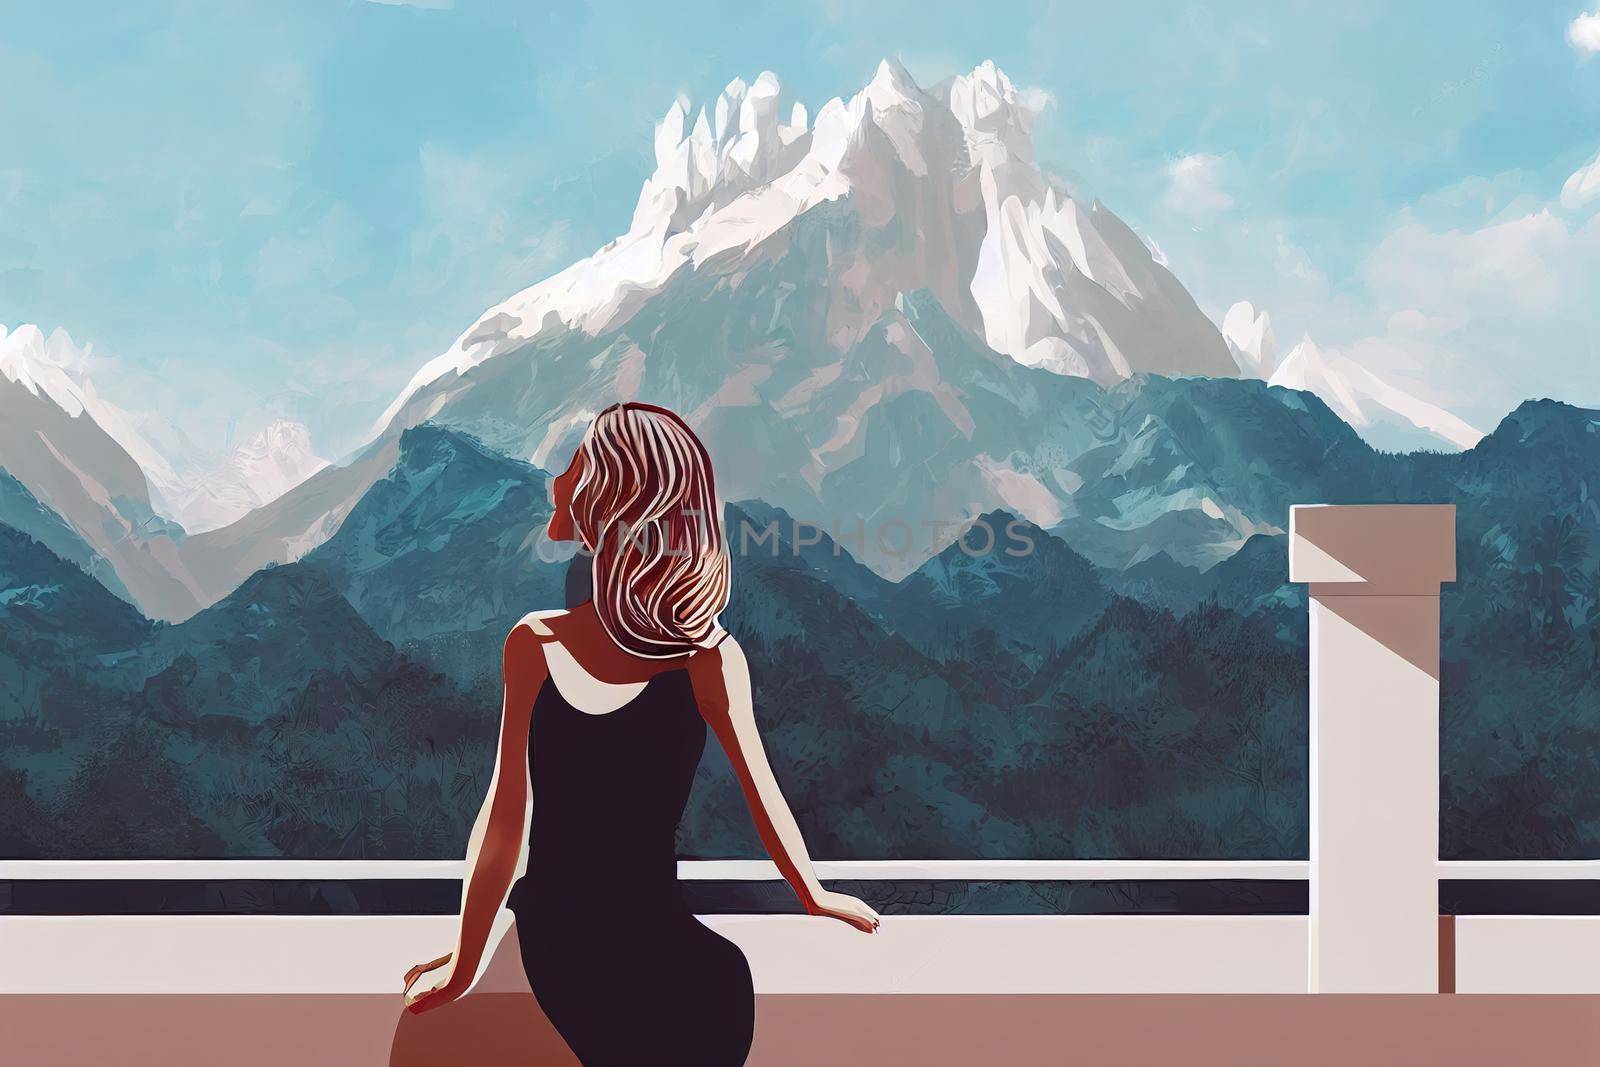 Portrait of gorgeous woman posing against the backdrop of mountains on the balcony architecture Relaxation concept, 2d illustration, 2d style